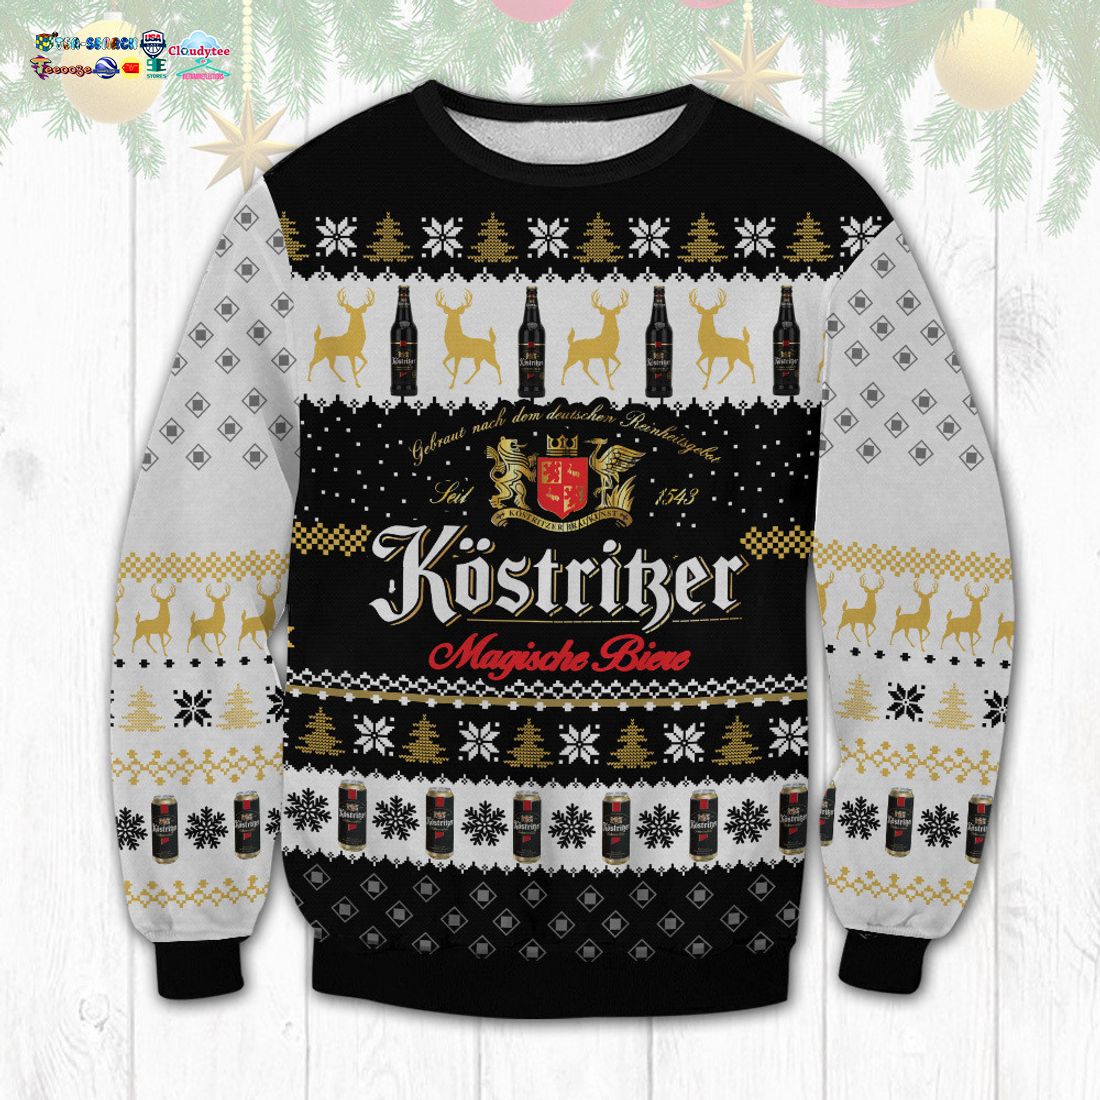 Kostriber Ugly Christmas Sweater - You look lazy